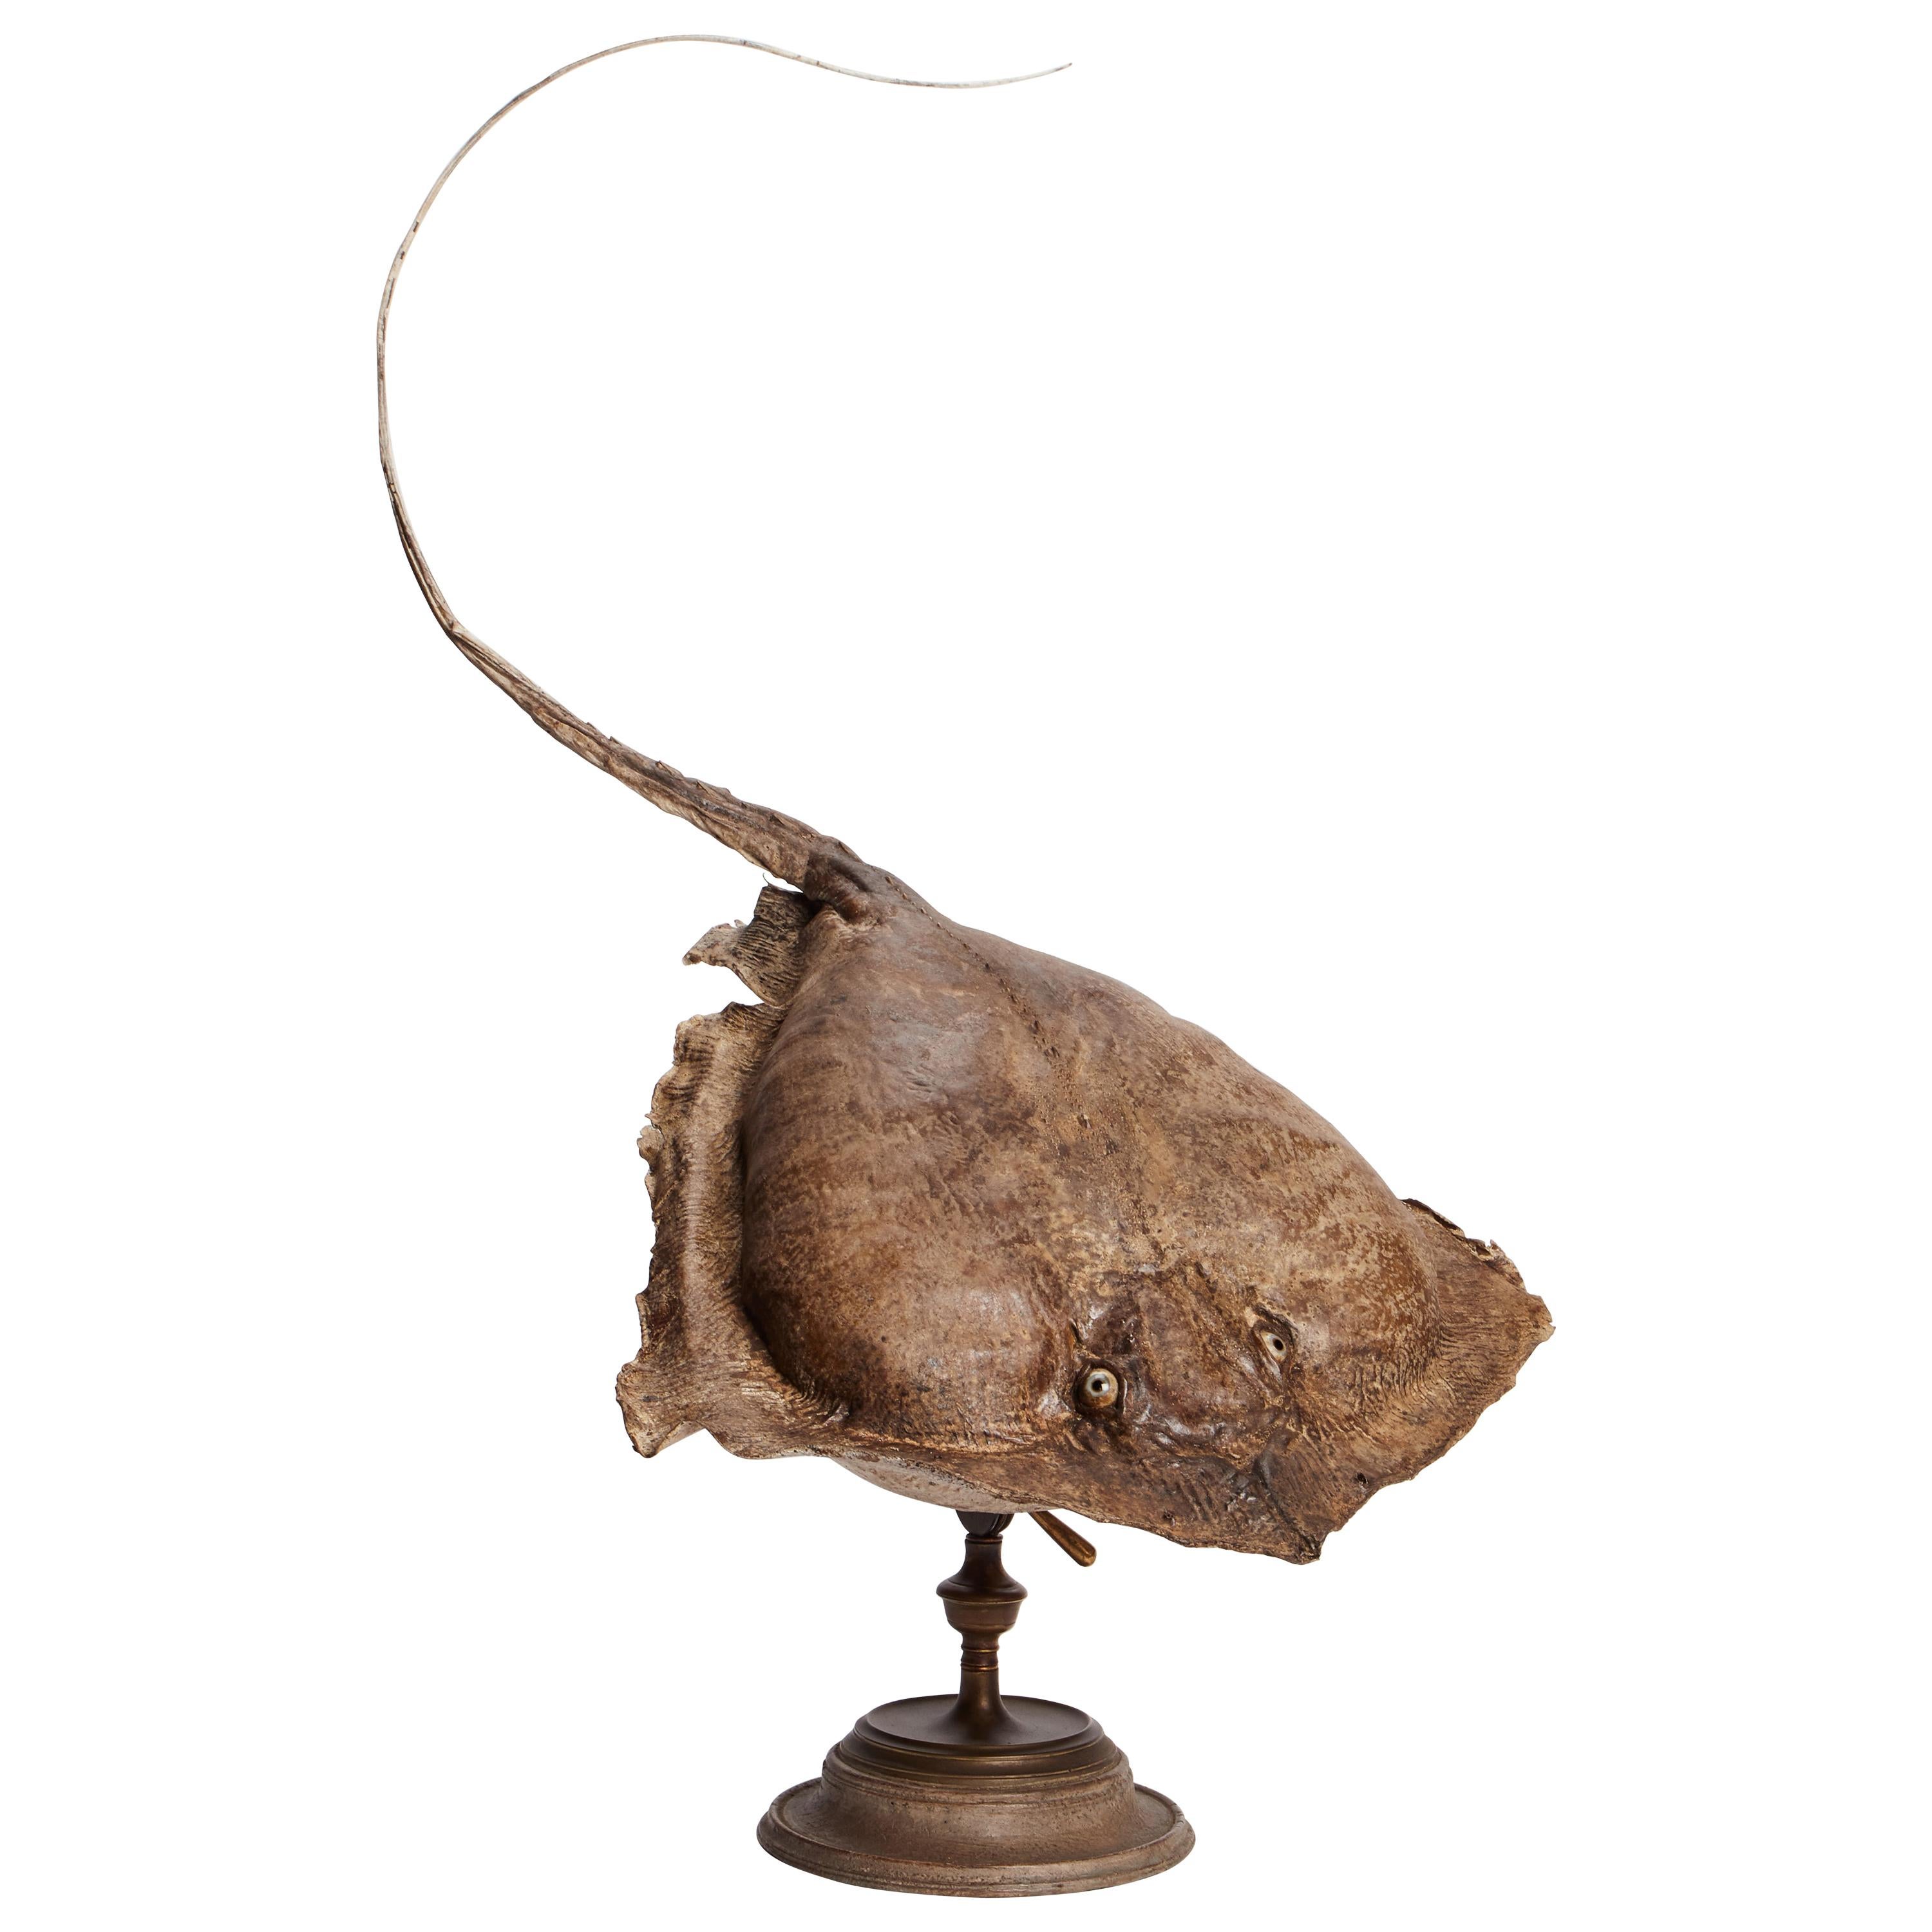 19th Century Wunderkammer Marine Natural Taxodermie Specimen of a Stingray